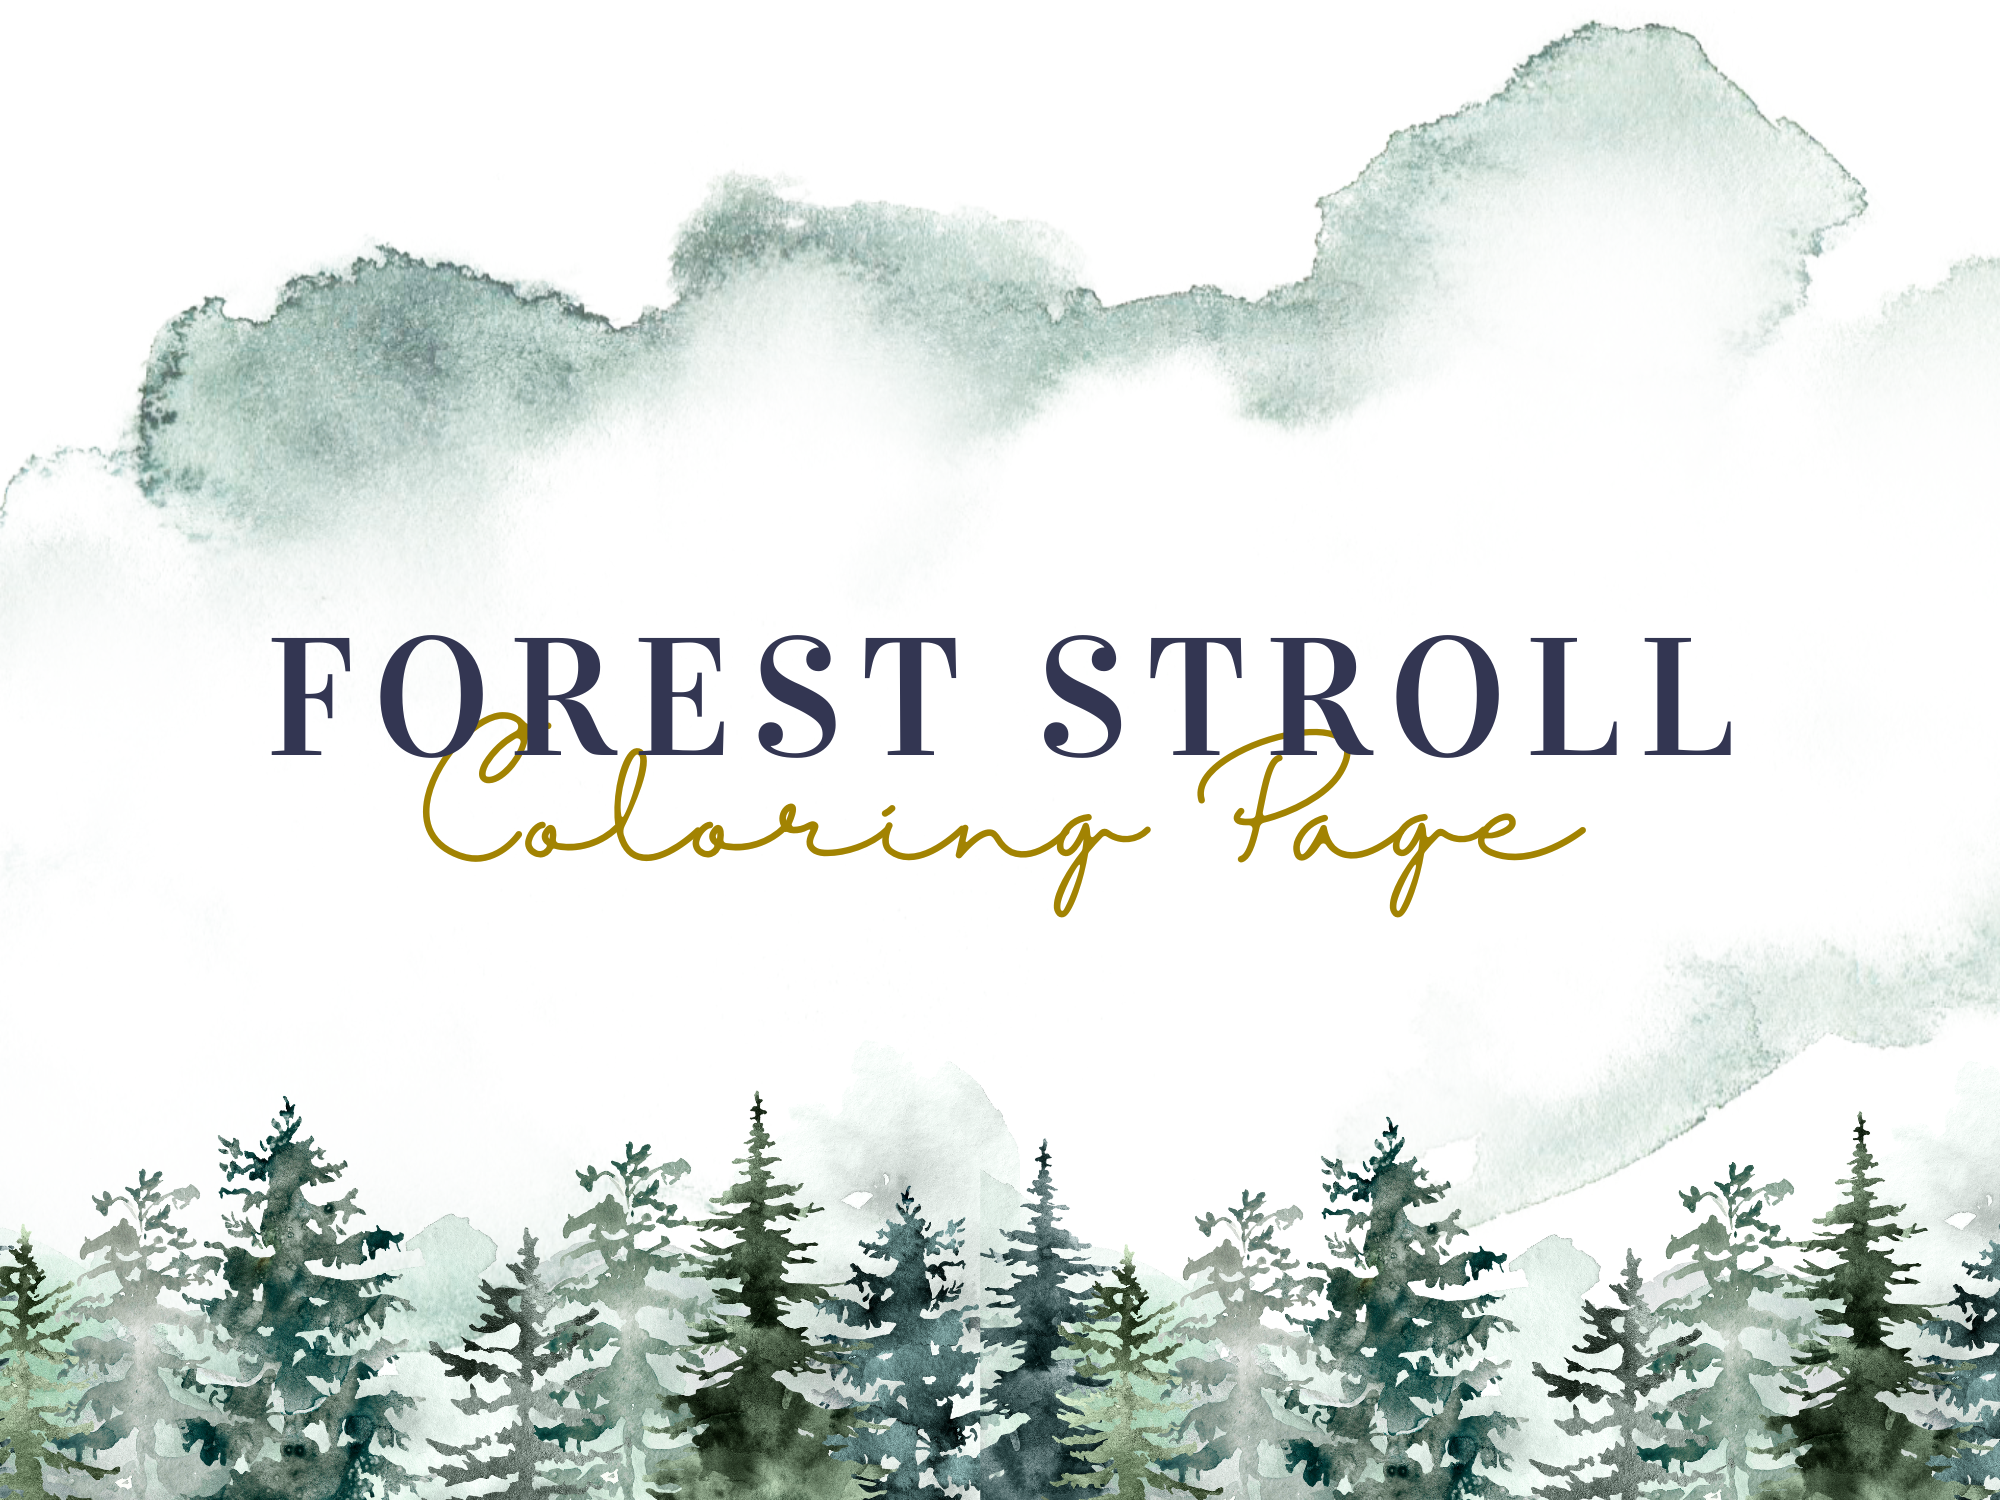 Forest Stroll Coloring Page title page